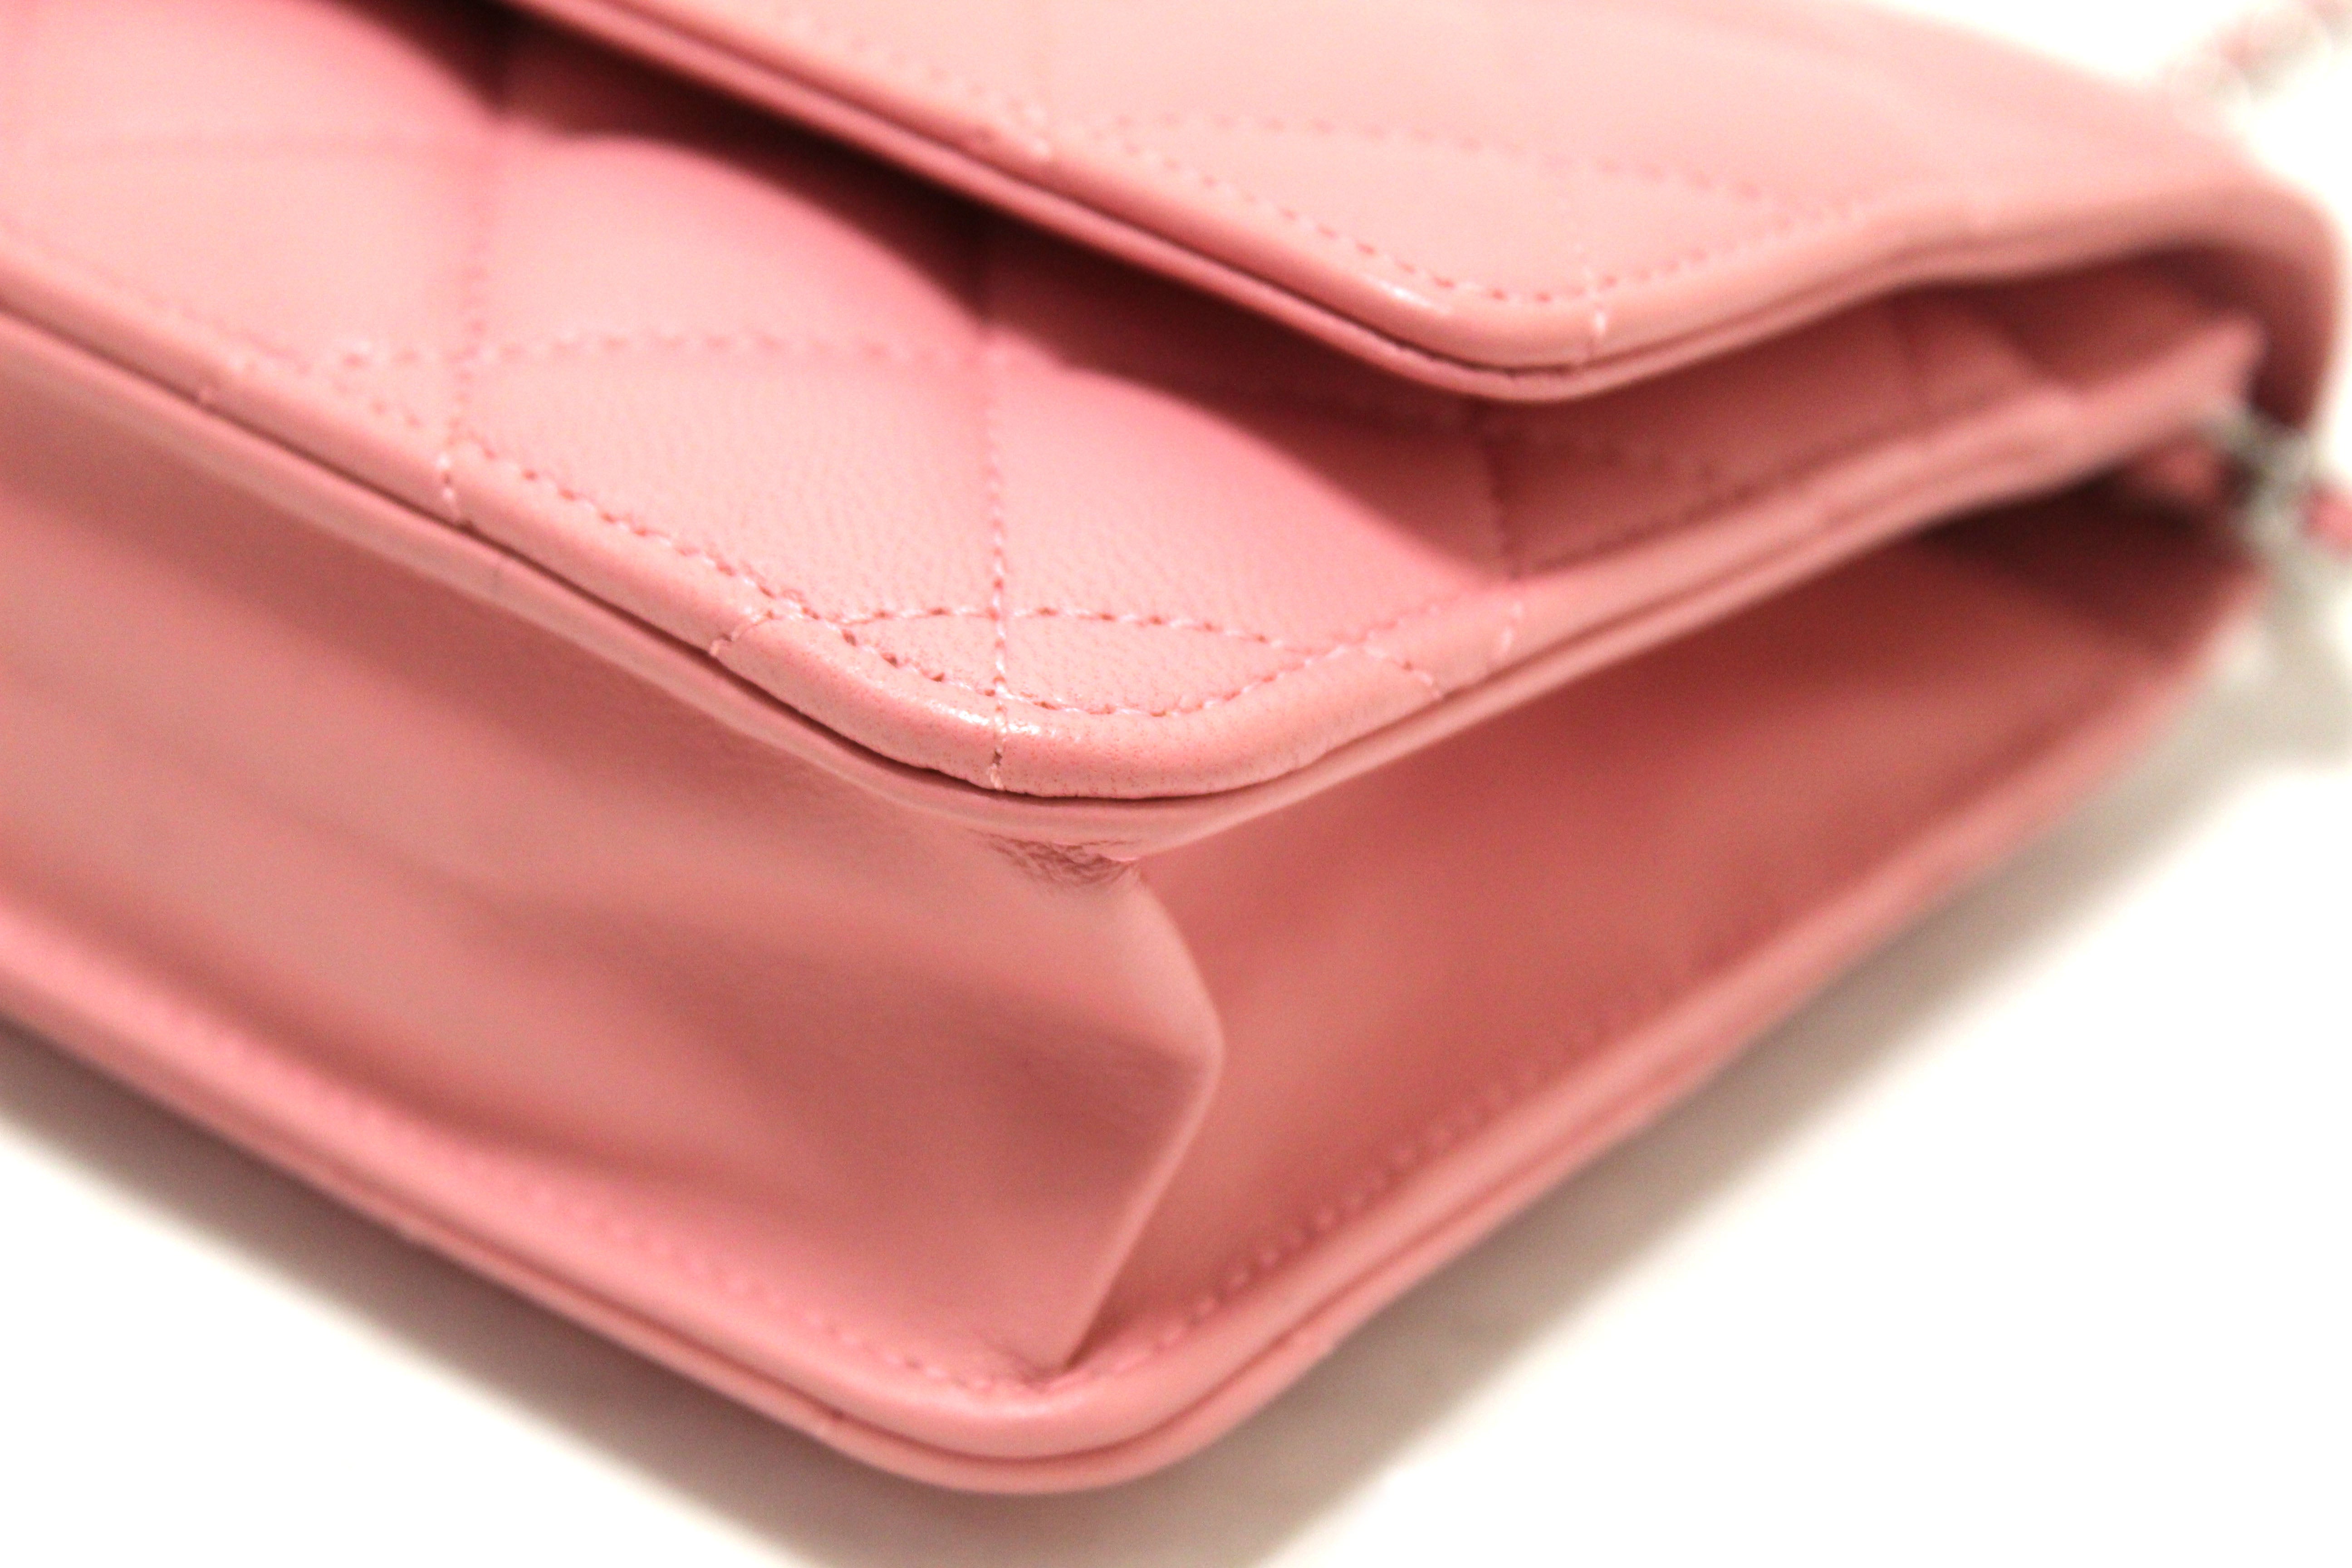 Chanel Pink Quilted Patent Leather CC Zip Coin Purse